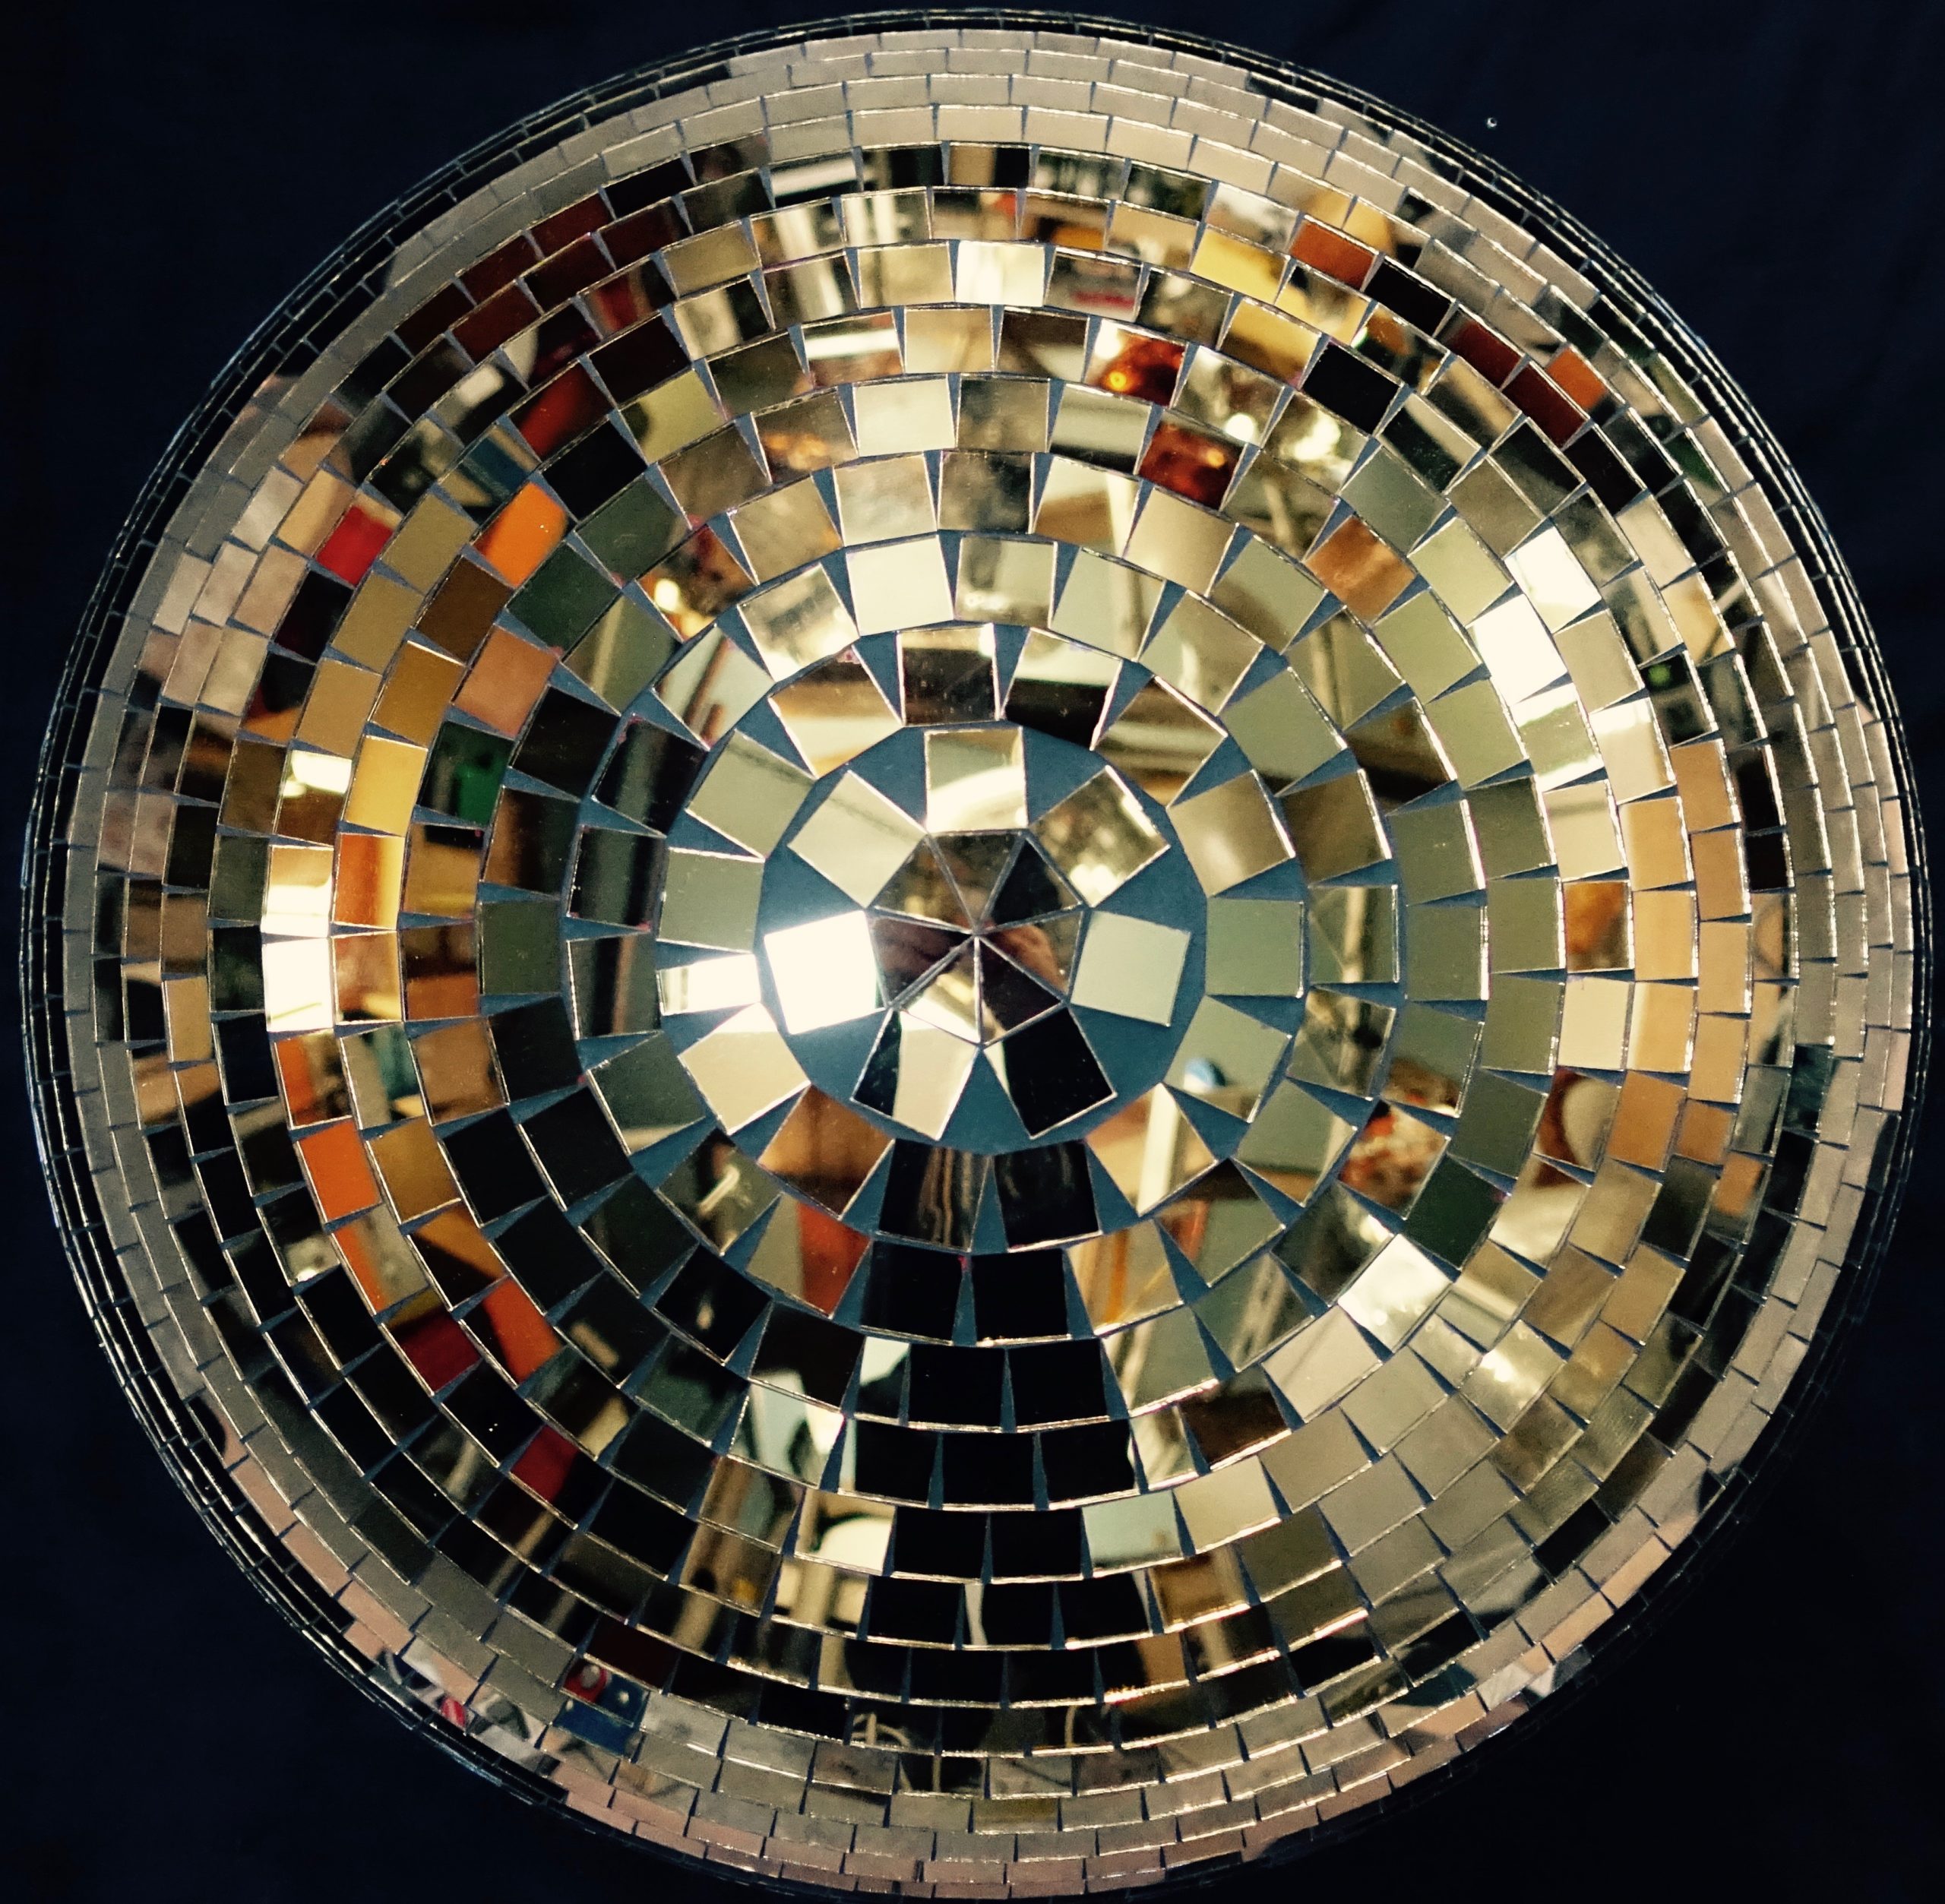 750mm gold mirror ball approx weight 25kg dry hire fee - £130 purchase price - POA